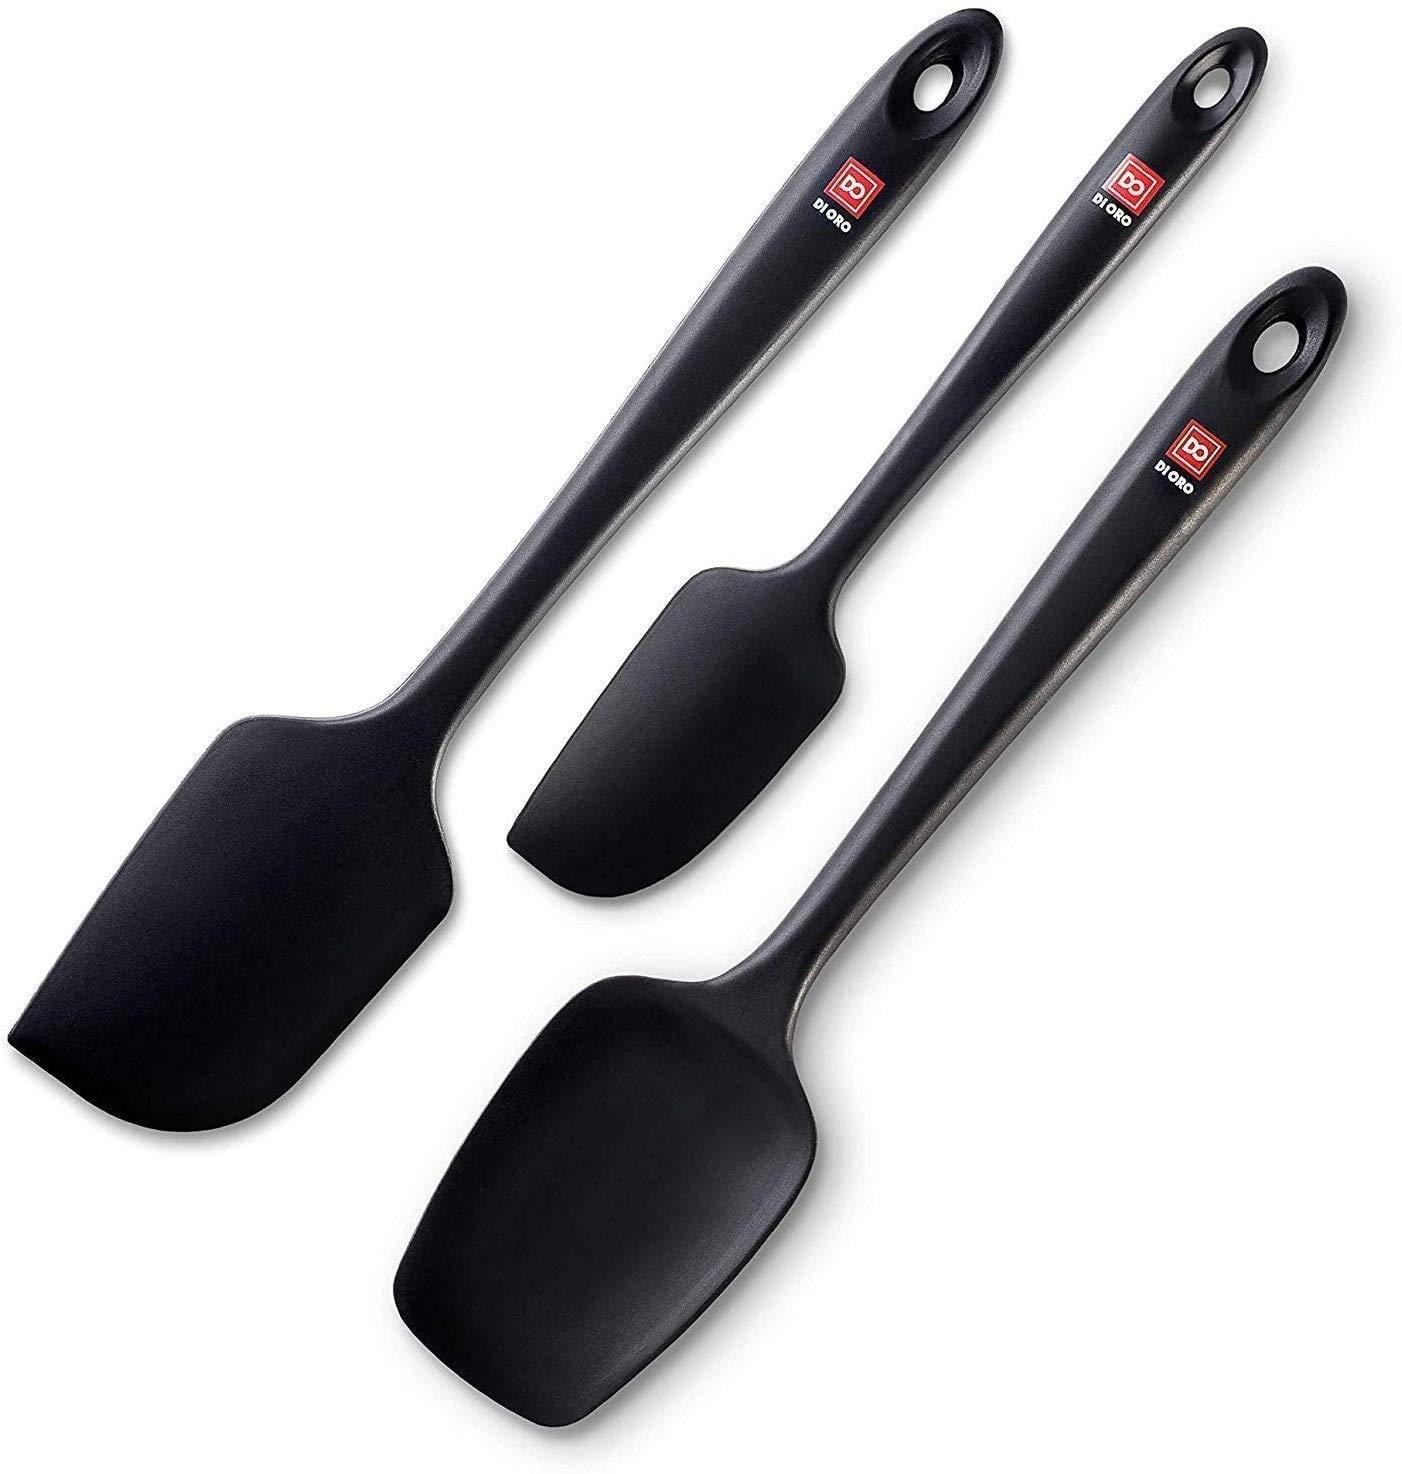 Silicone Spatula - 500°F Heat Resistant Seamless Rubber Spatulas with  Stainless Steel Core Kitchen Utensils Non-Stick for Cooking, Baking and  Mixing, Set of 4 